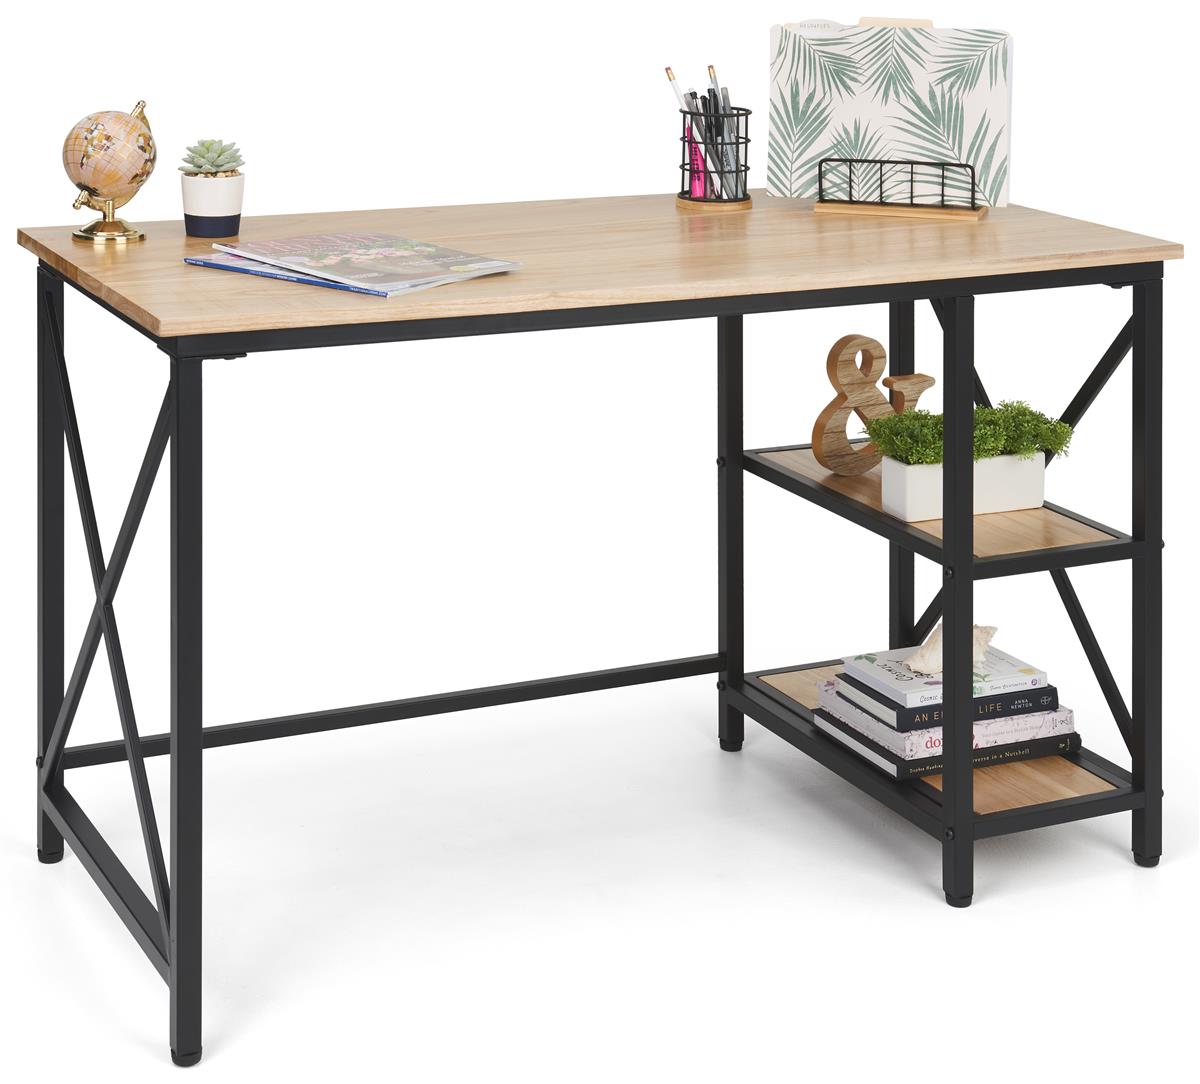 Wood And Steel Desk | Two Shelves For Extra Storage